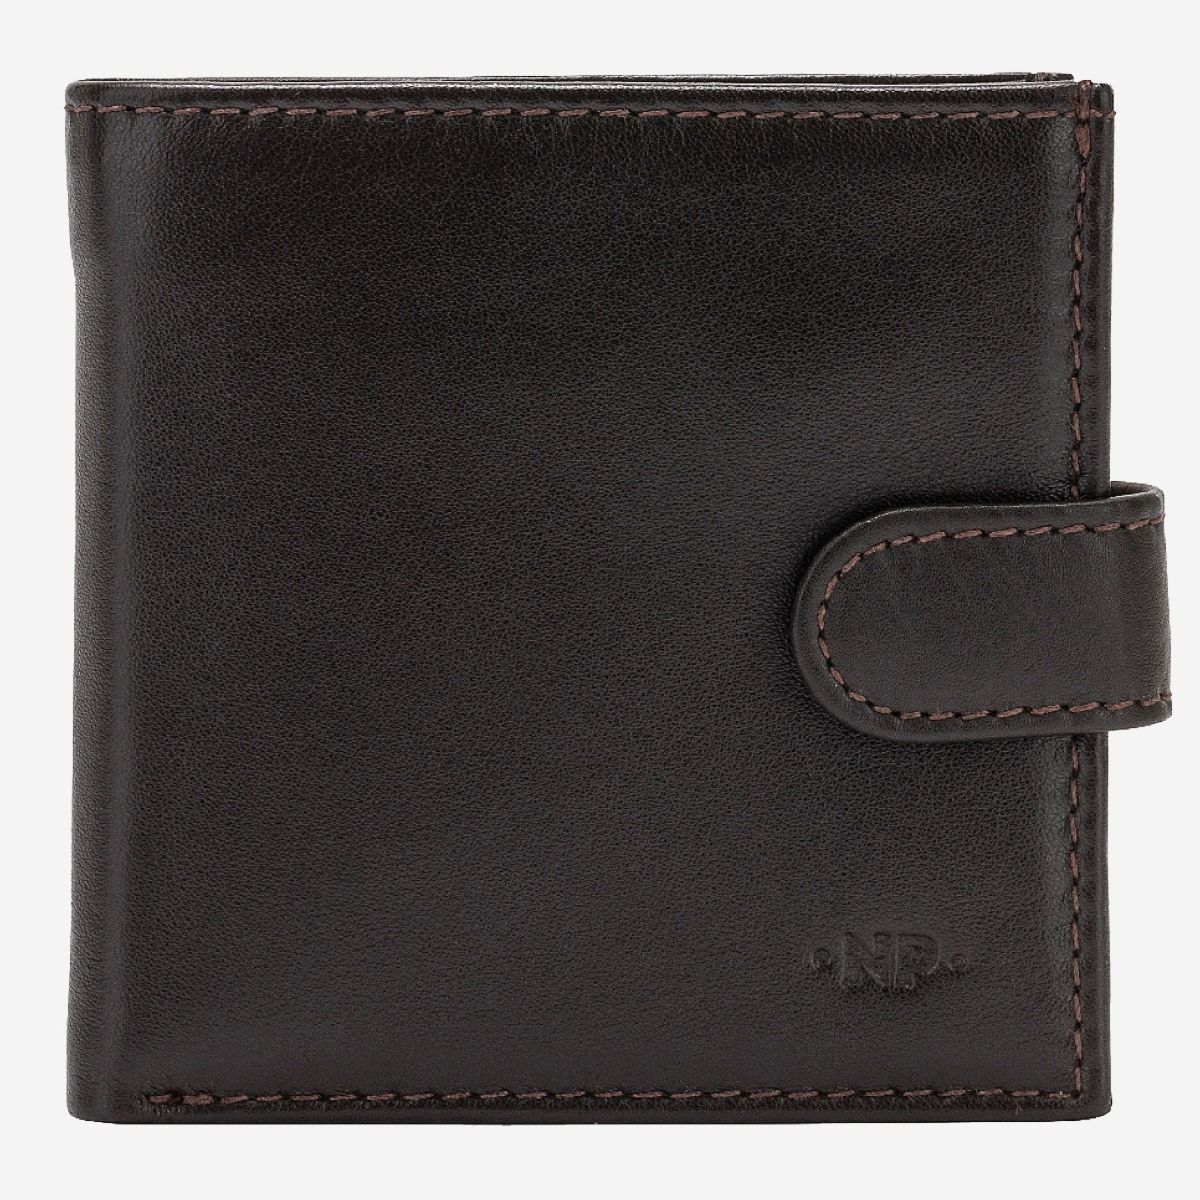 NUVOLA PELLE Mens Leather Wallet With Snap Closure Nappa - Dark Brown